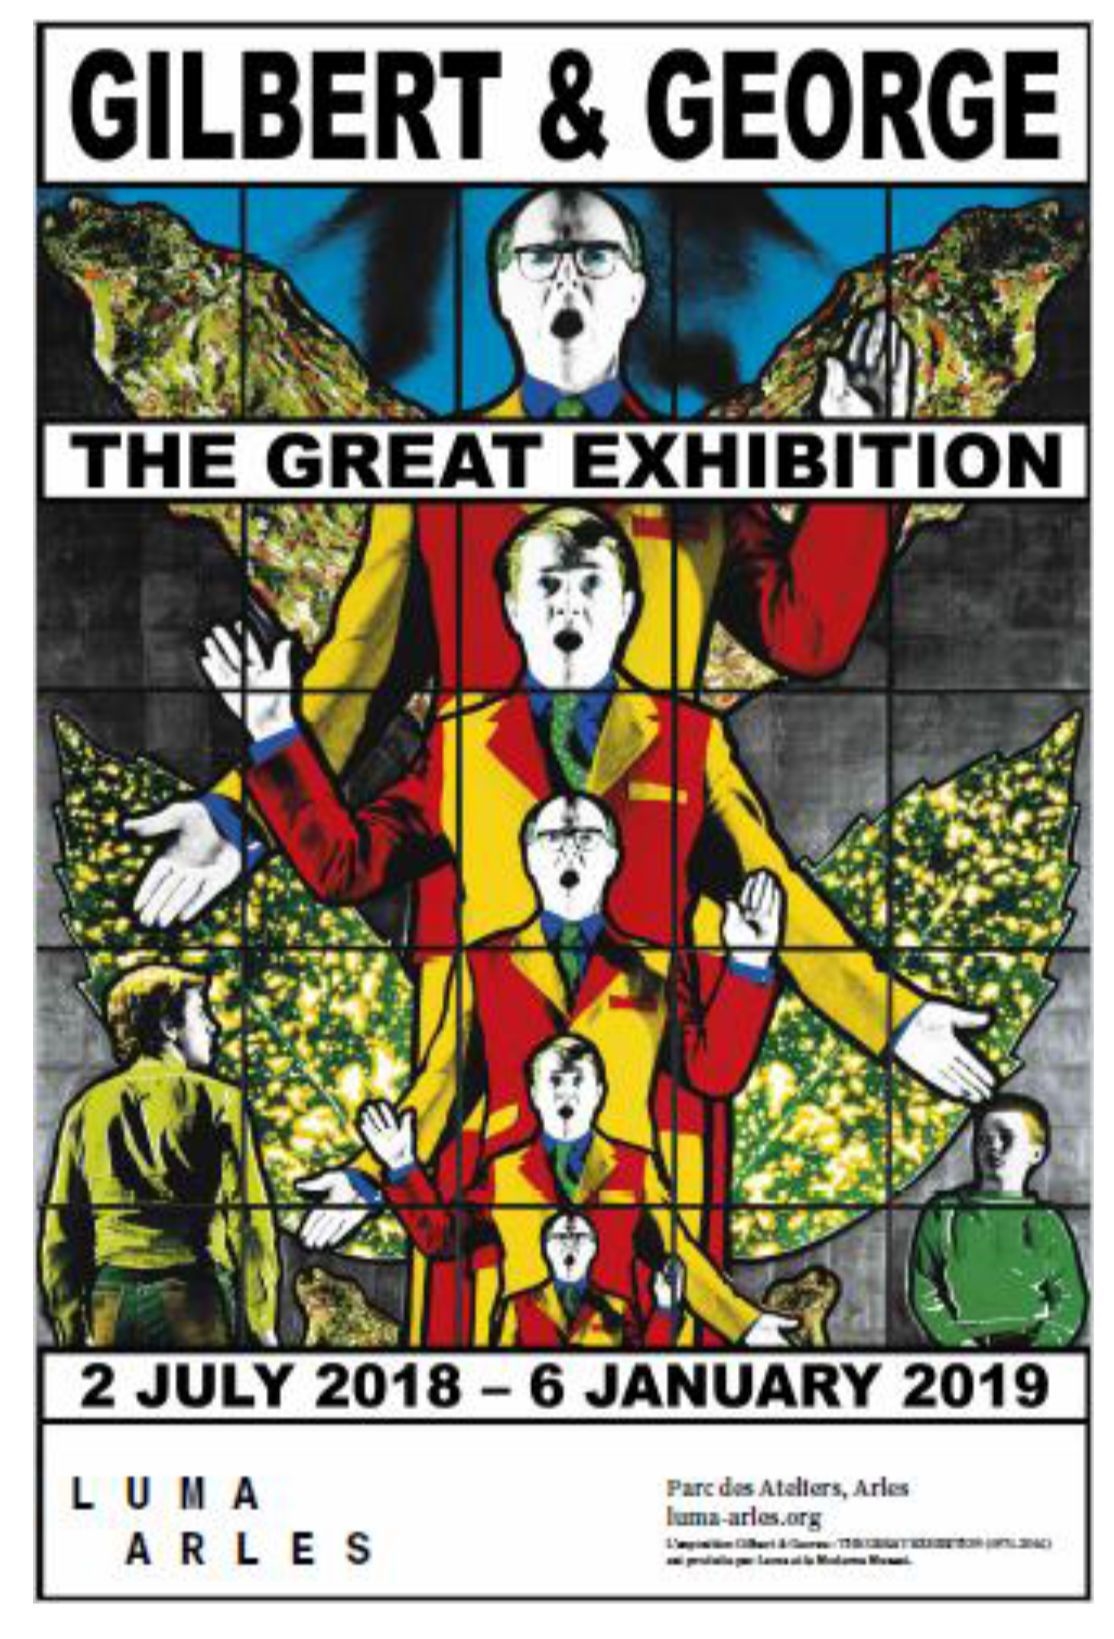 The Great Exhibition by Gilbert & George, 2018-2019